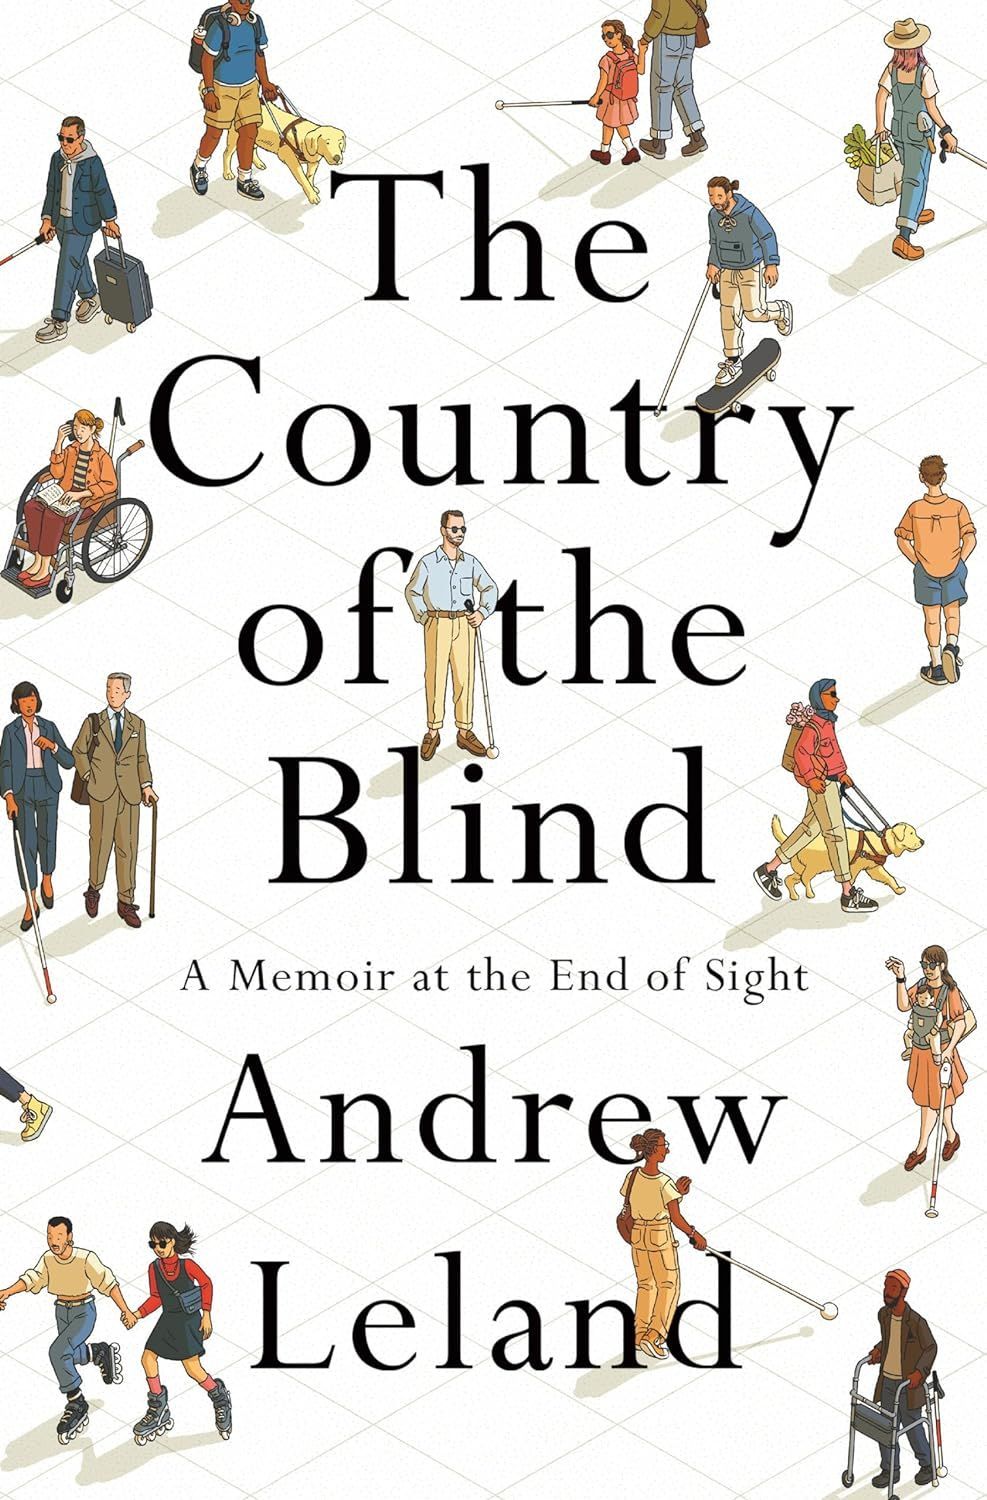 Leaving Me My Eyes: On Andrew Leland’s “The Country of the Blind”